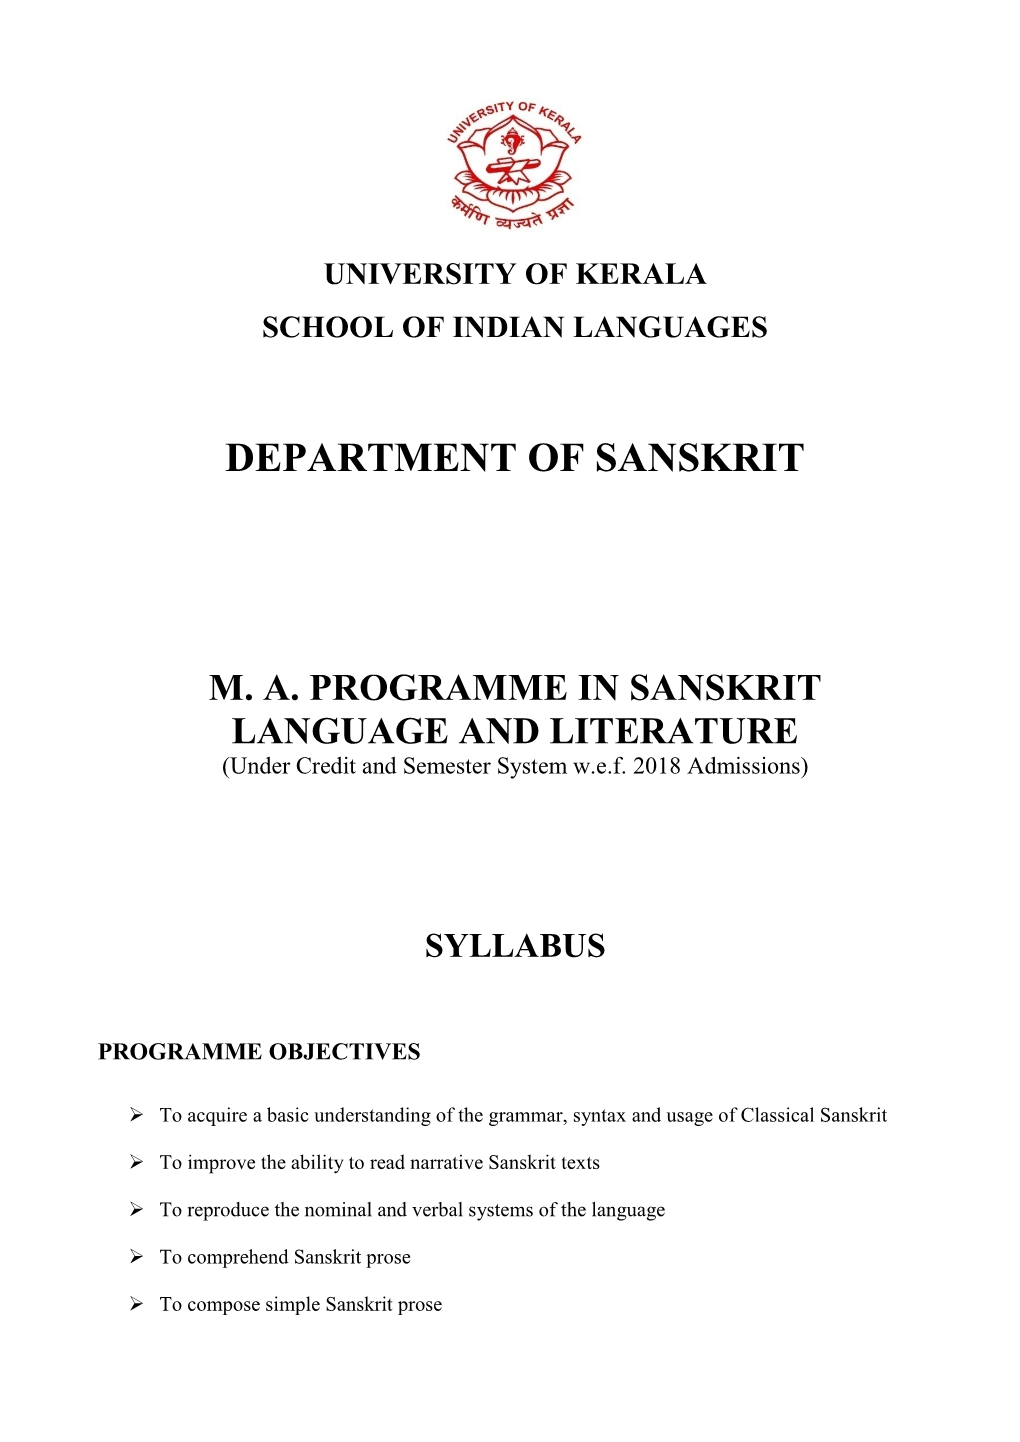 SANSKRIT LANGUAGE and LITERATURE (Under Credit and Semester System W.E.F